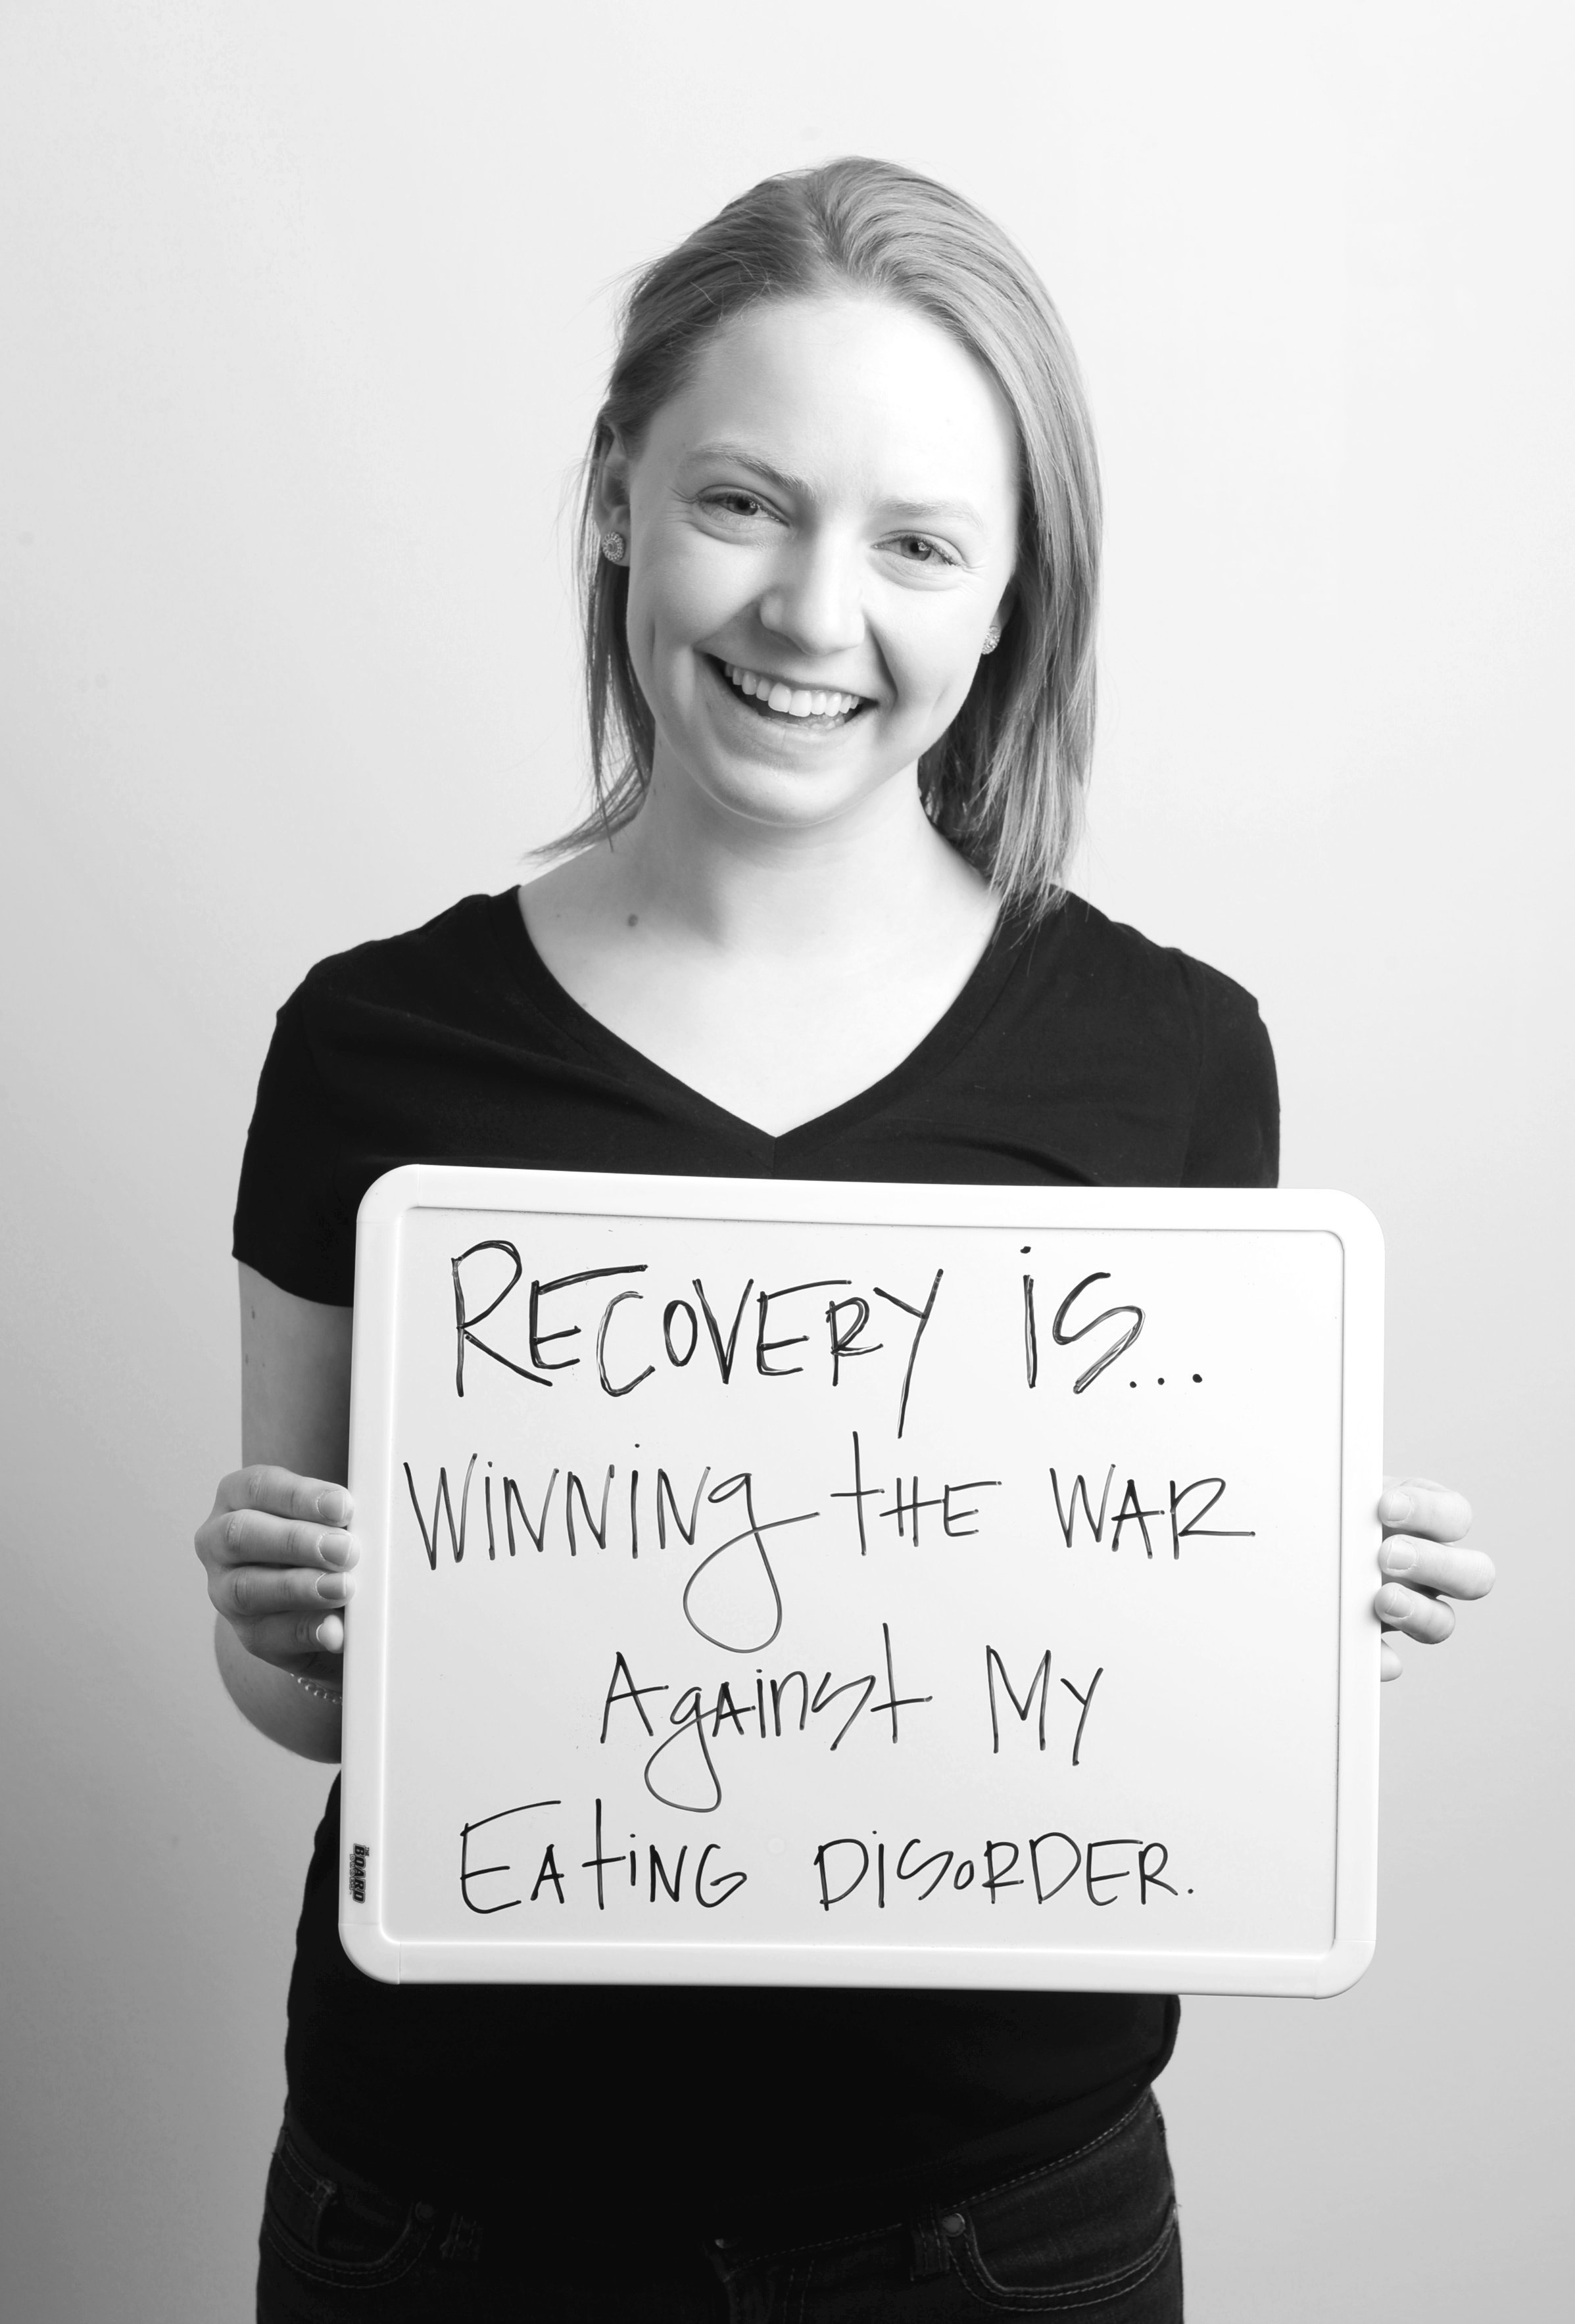 dating someone recovering from an eating disorder